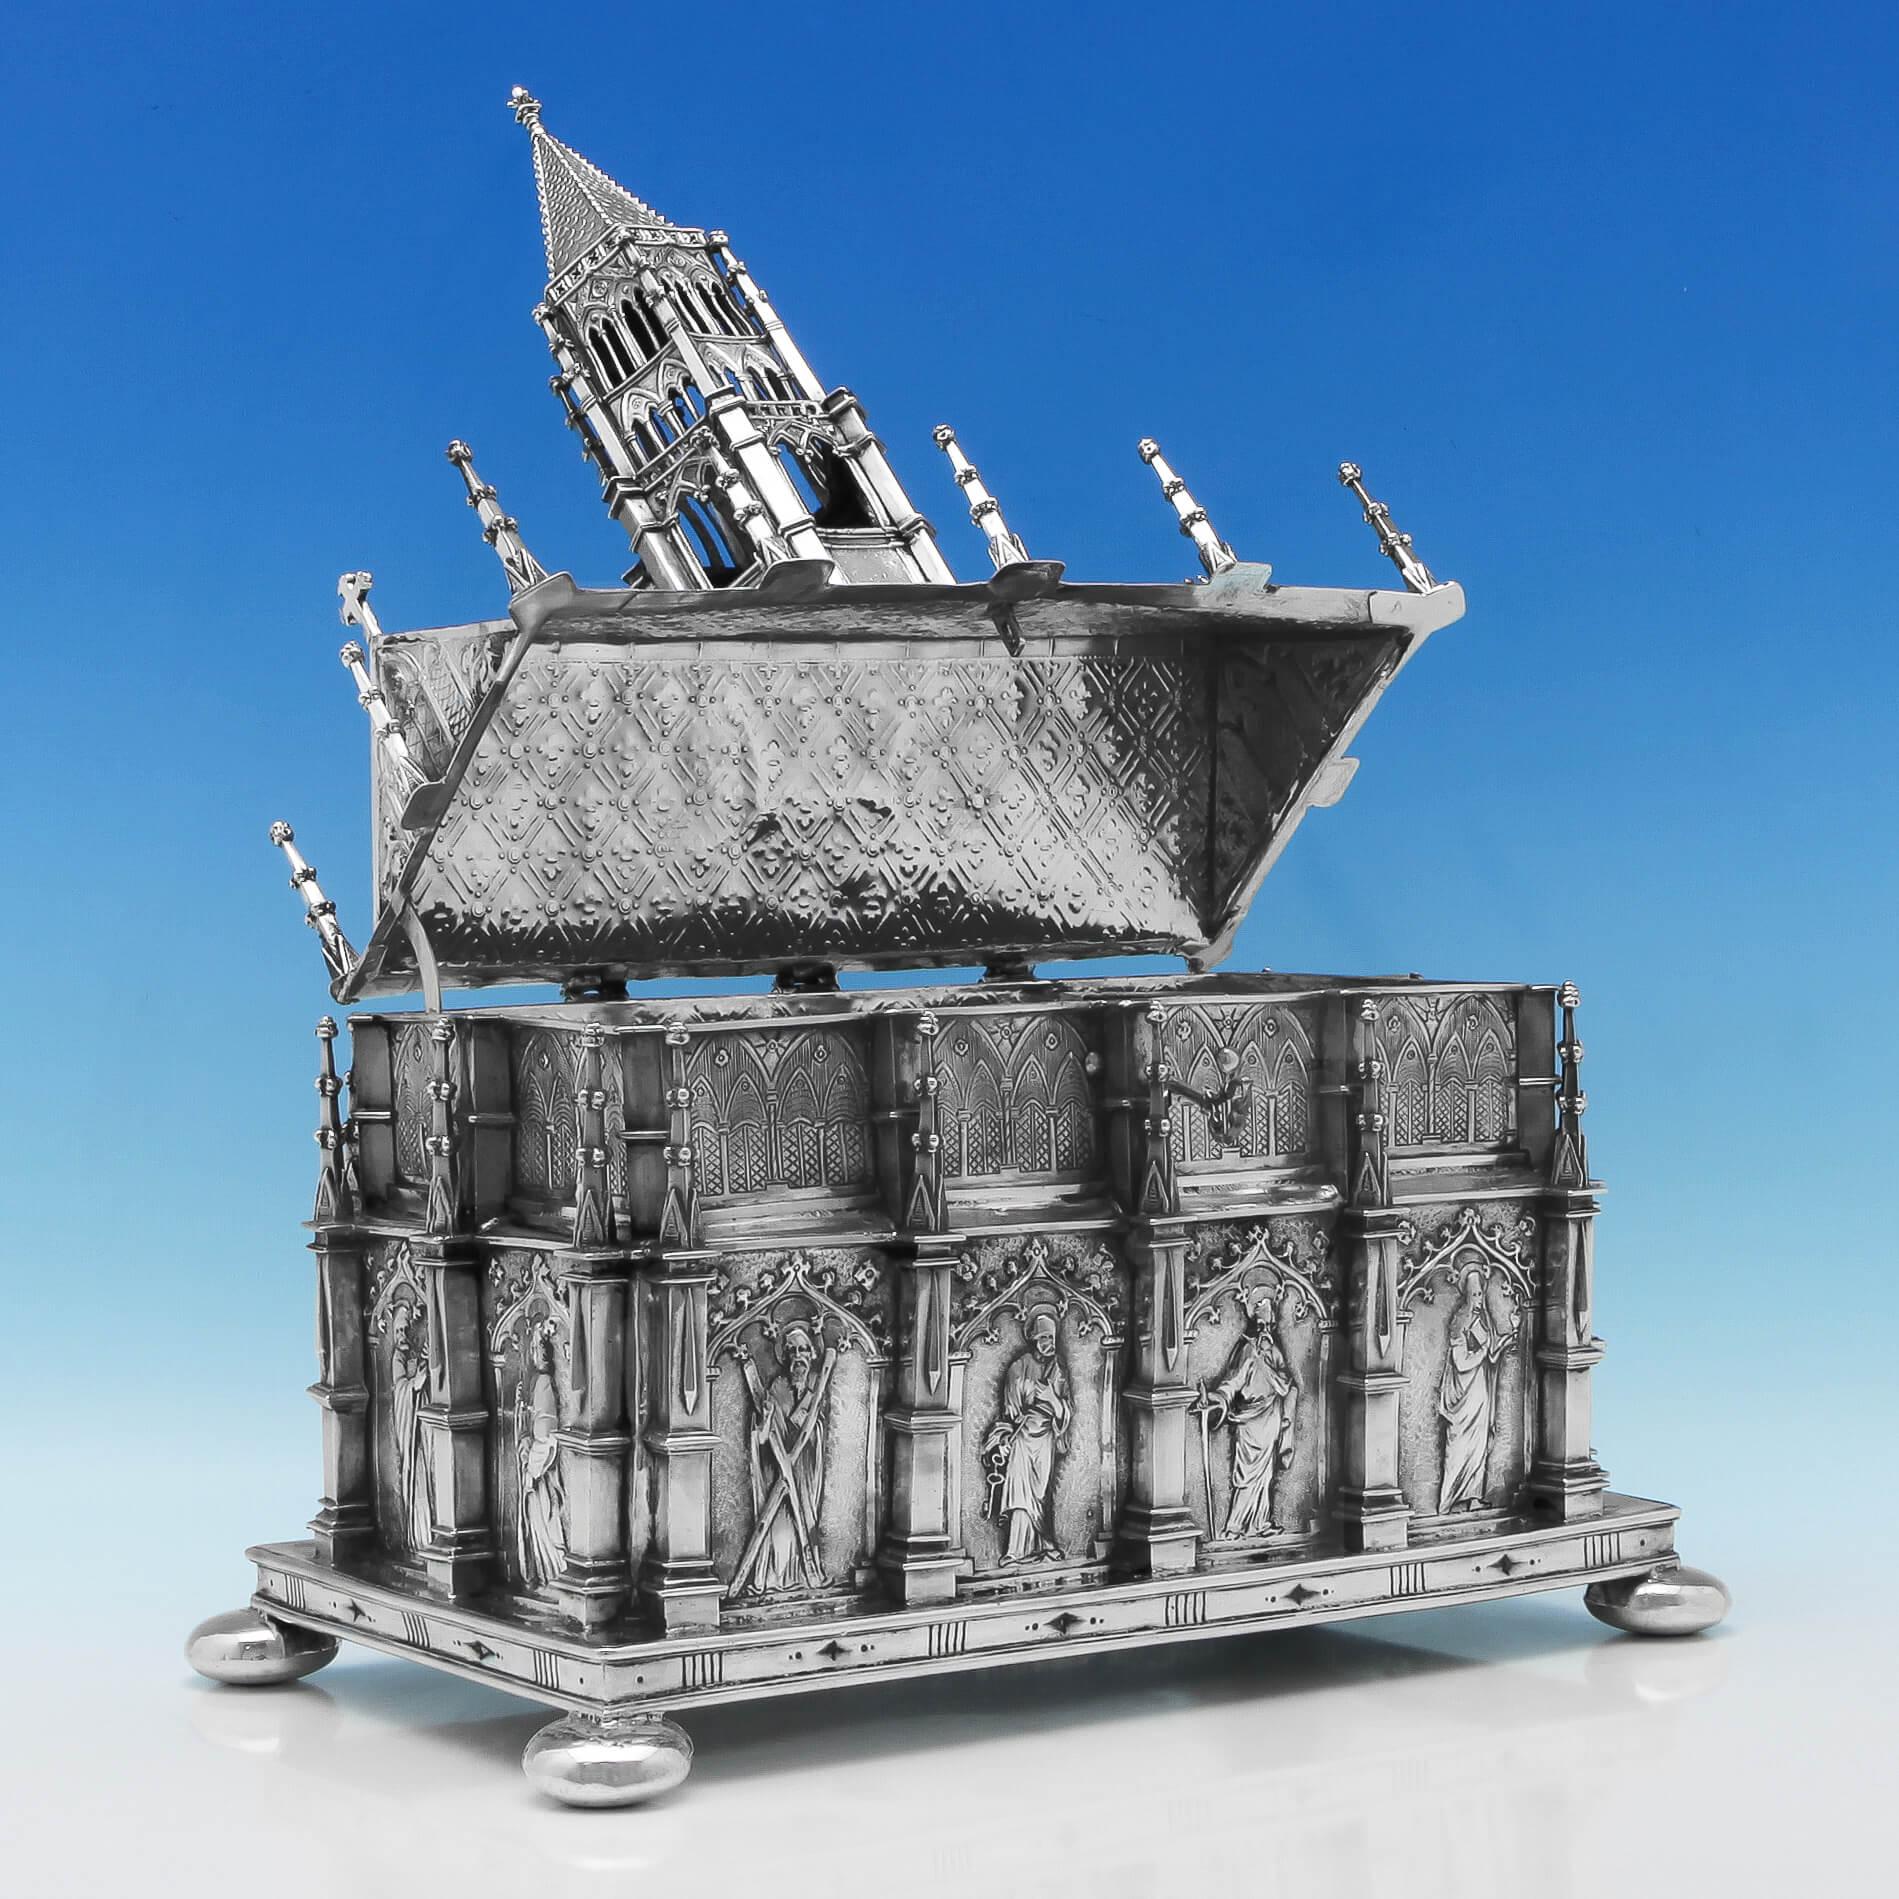 Made circa 1890, this wonderful and unusual, Victorian, Antique, German silver tabernacle box, or Reliquary, is in the form of a church, with a lockable hinged roof. It has been decorated with chased scenes depicting the 12 apostles. The box